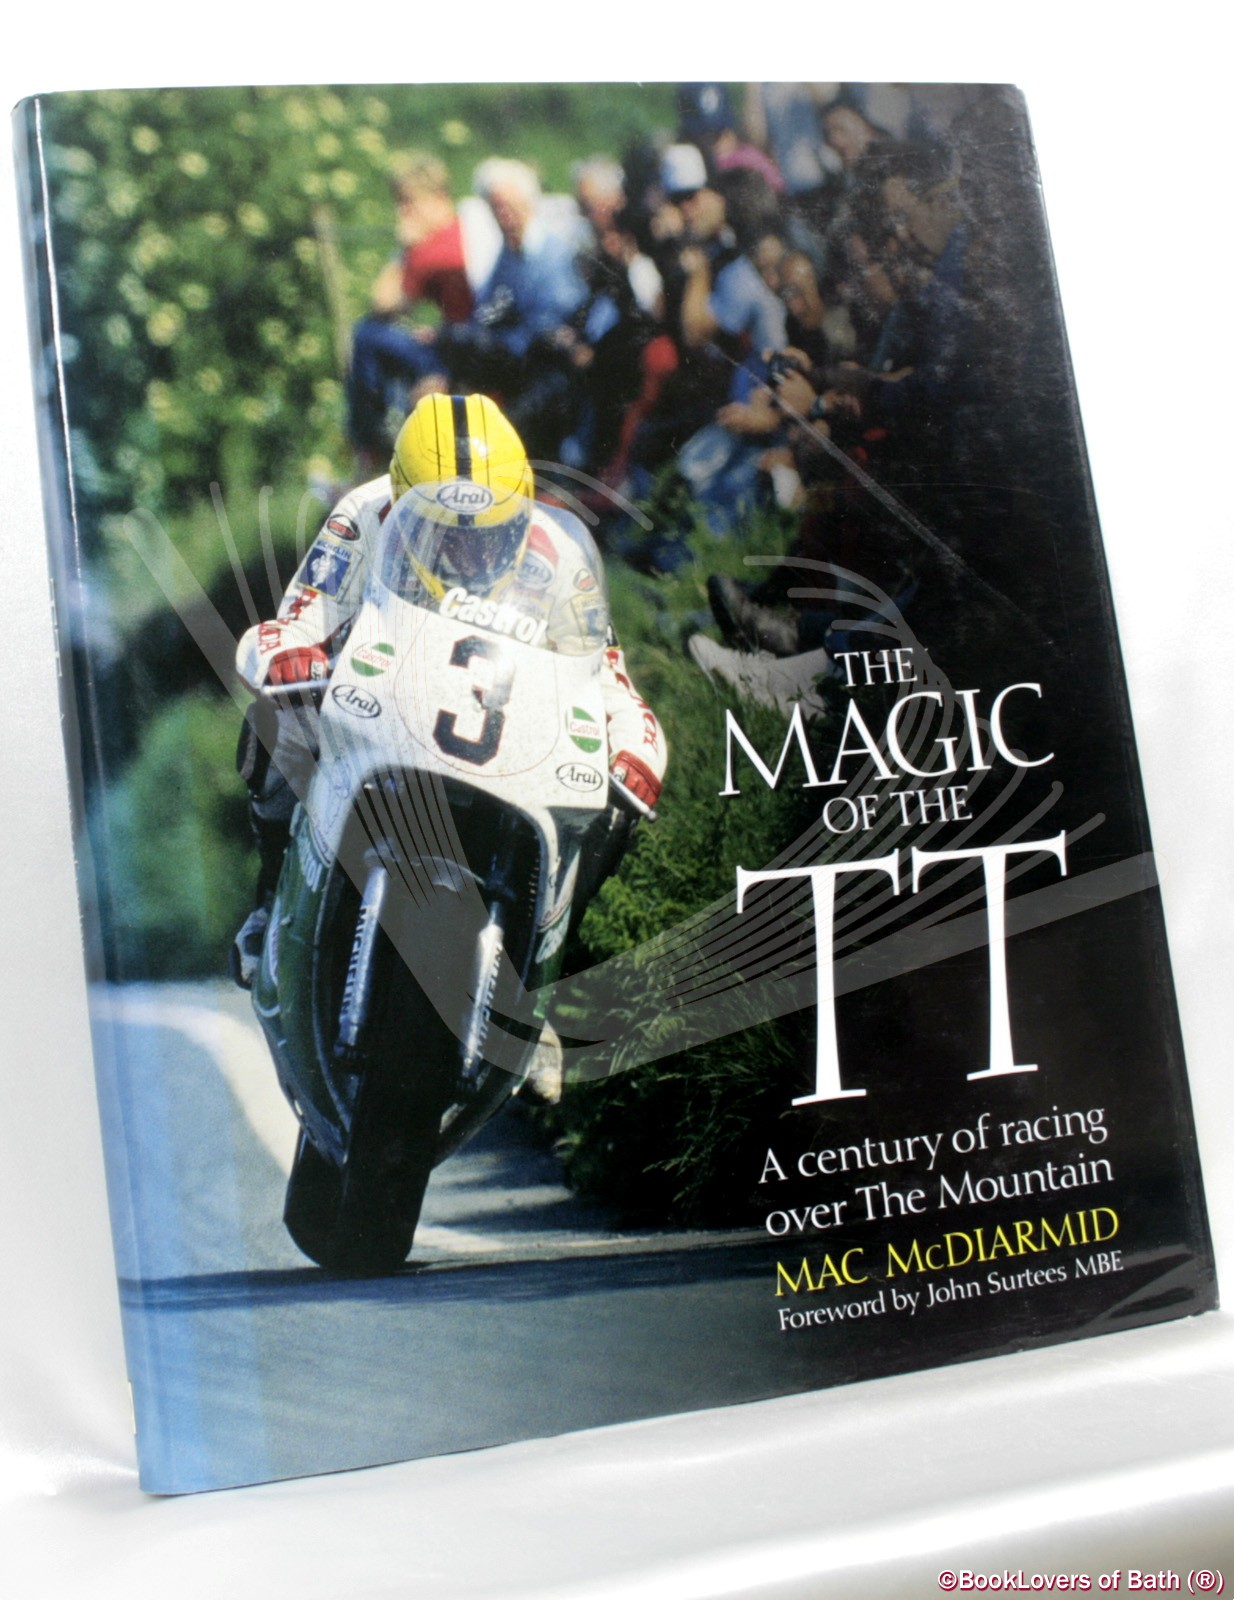 The Magic of TT: A Century of Racing Over the Mountain